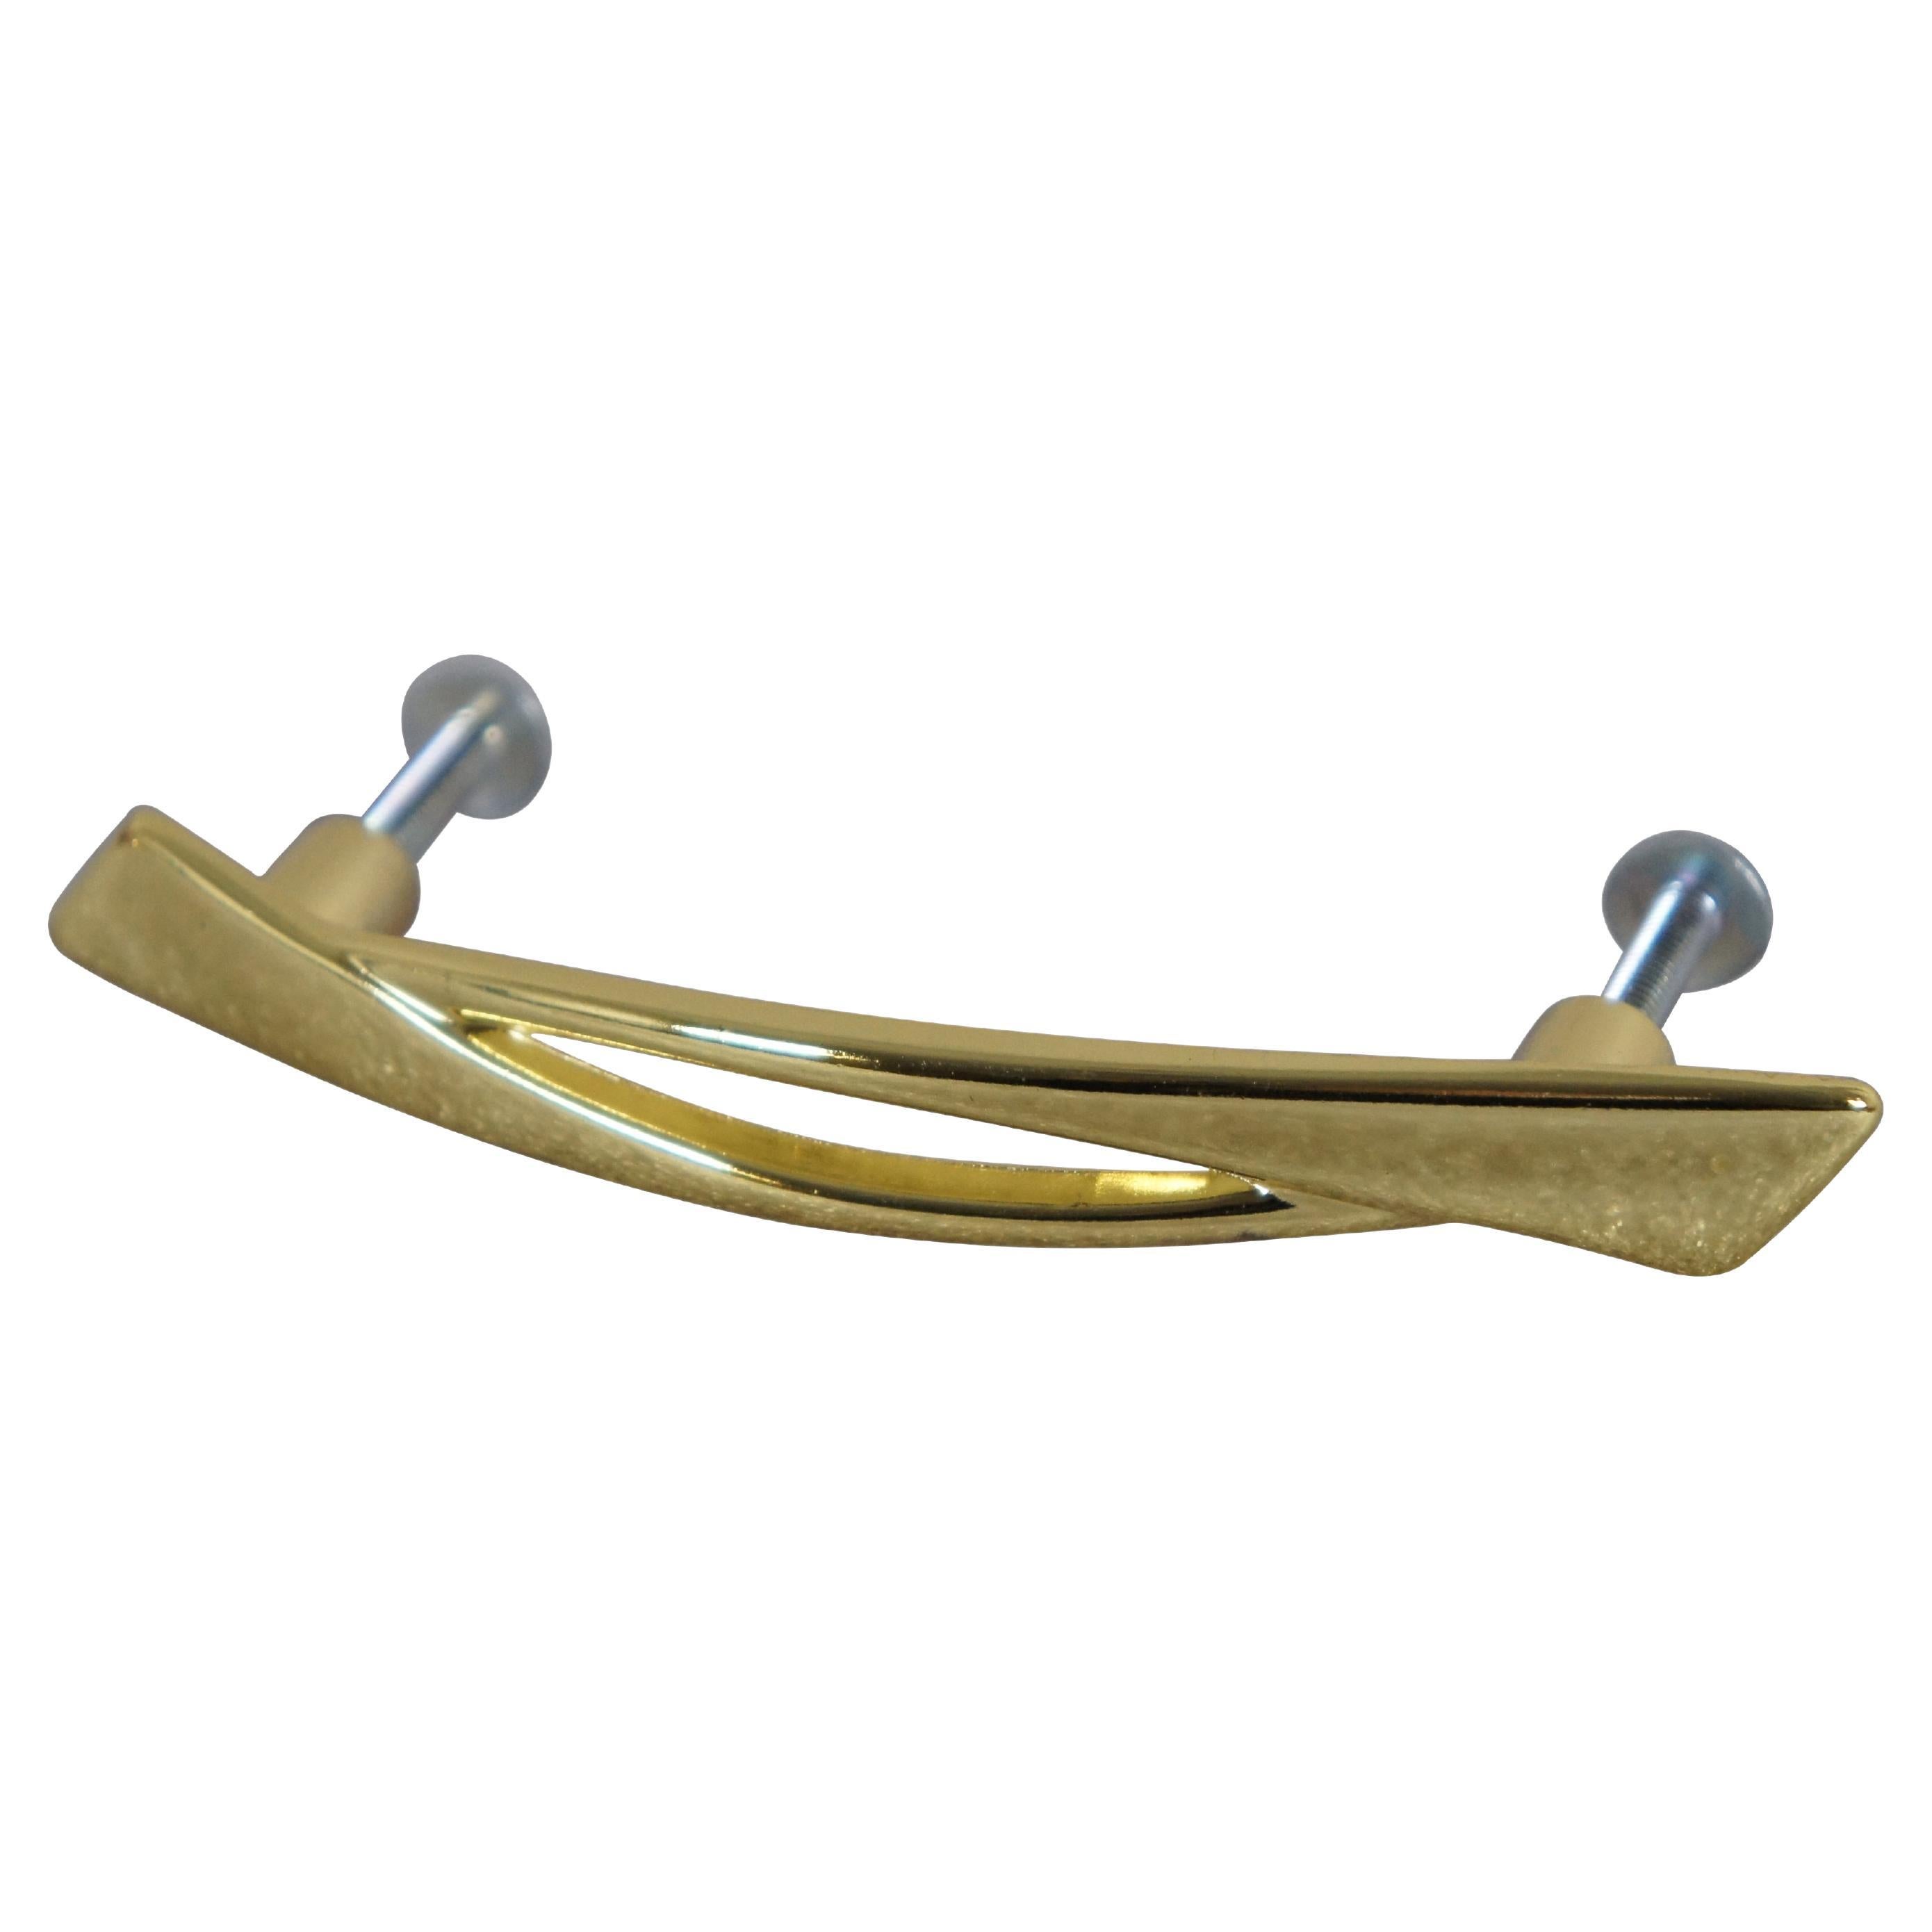 National Lock Co Medalist C278-3 Galaxie Bright Brass Drawer Pull MCM For Sale